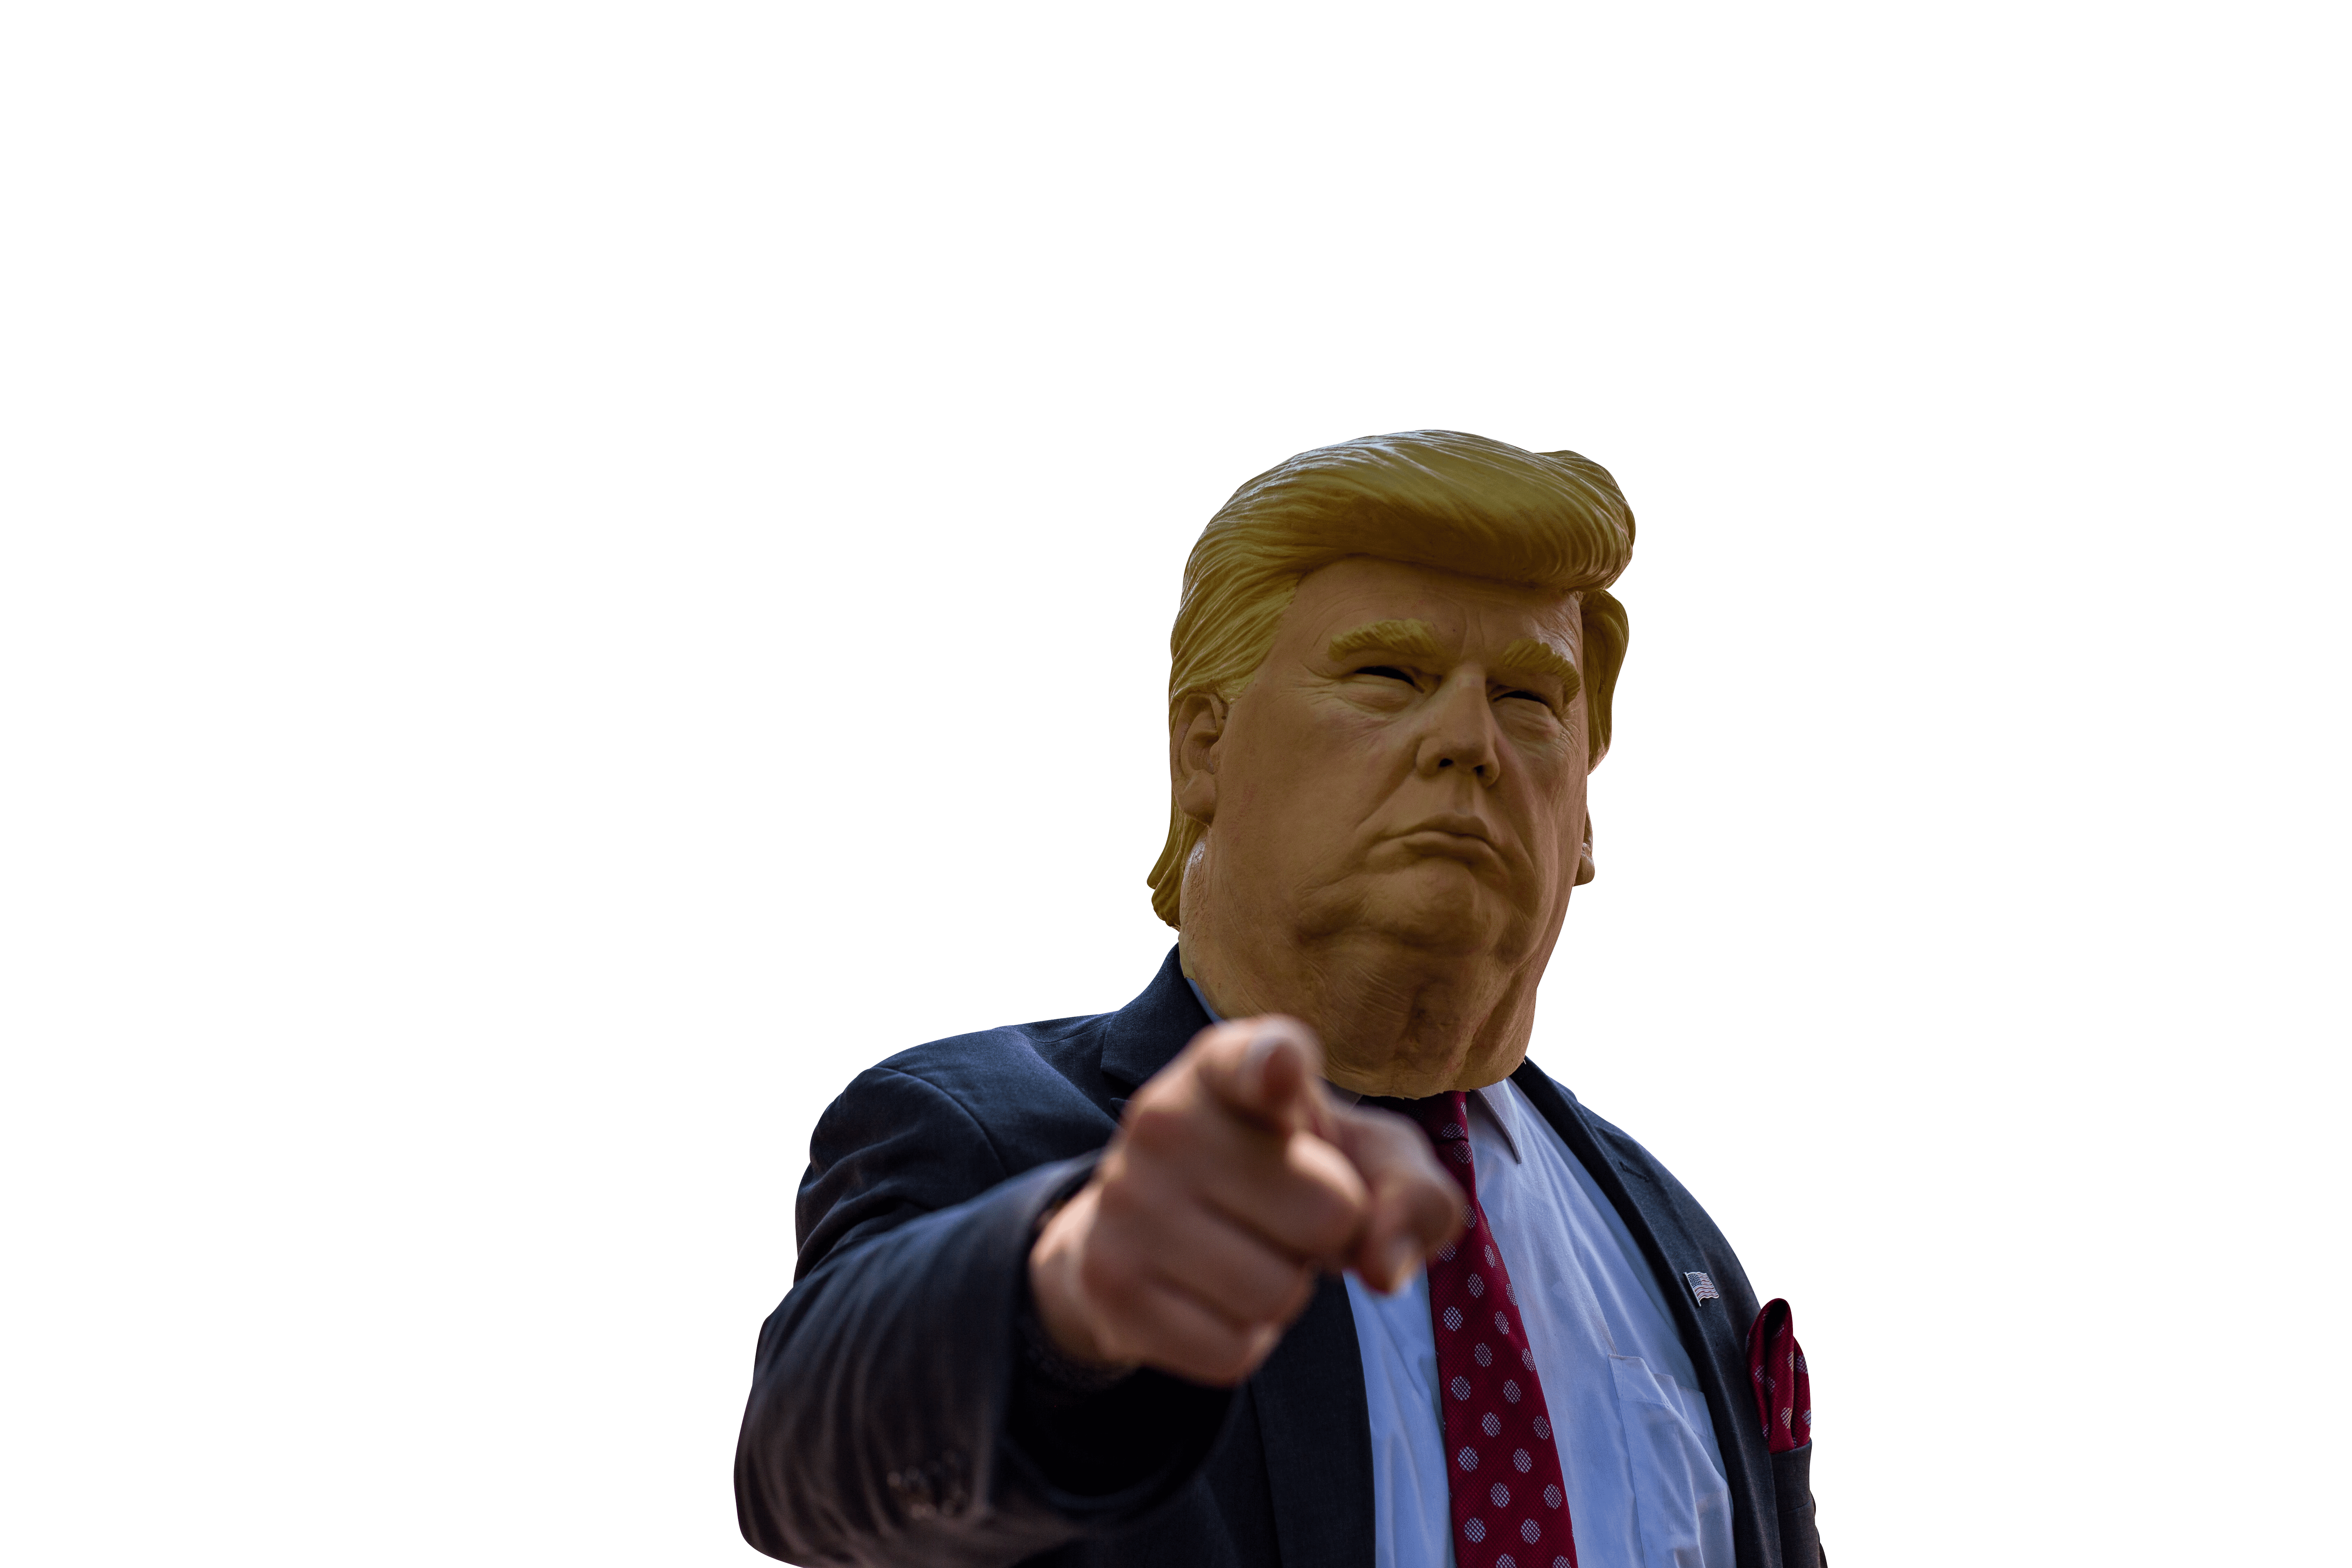 Trump pointing a finger transparent background.png